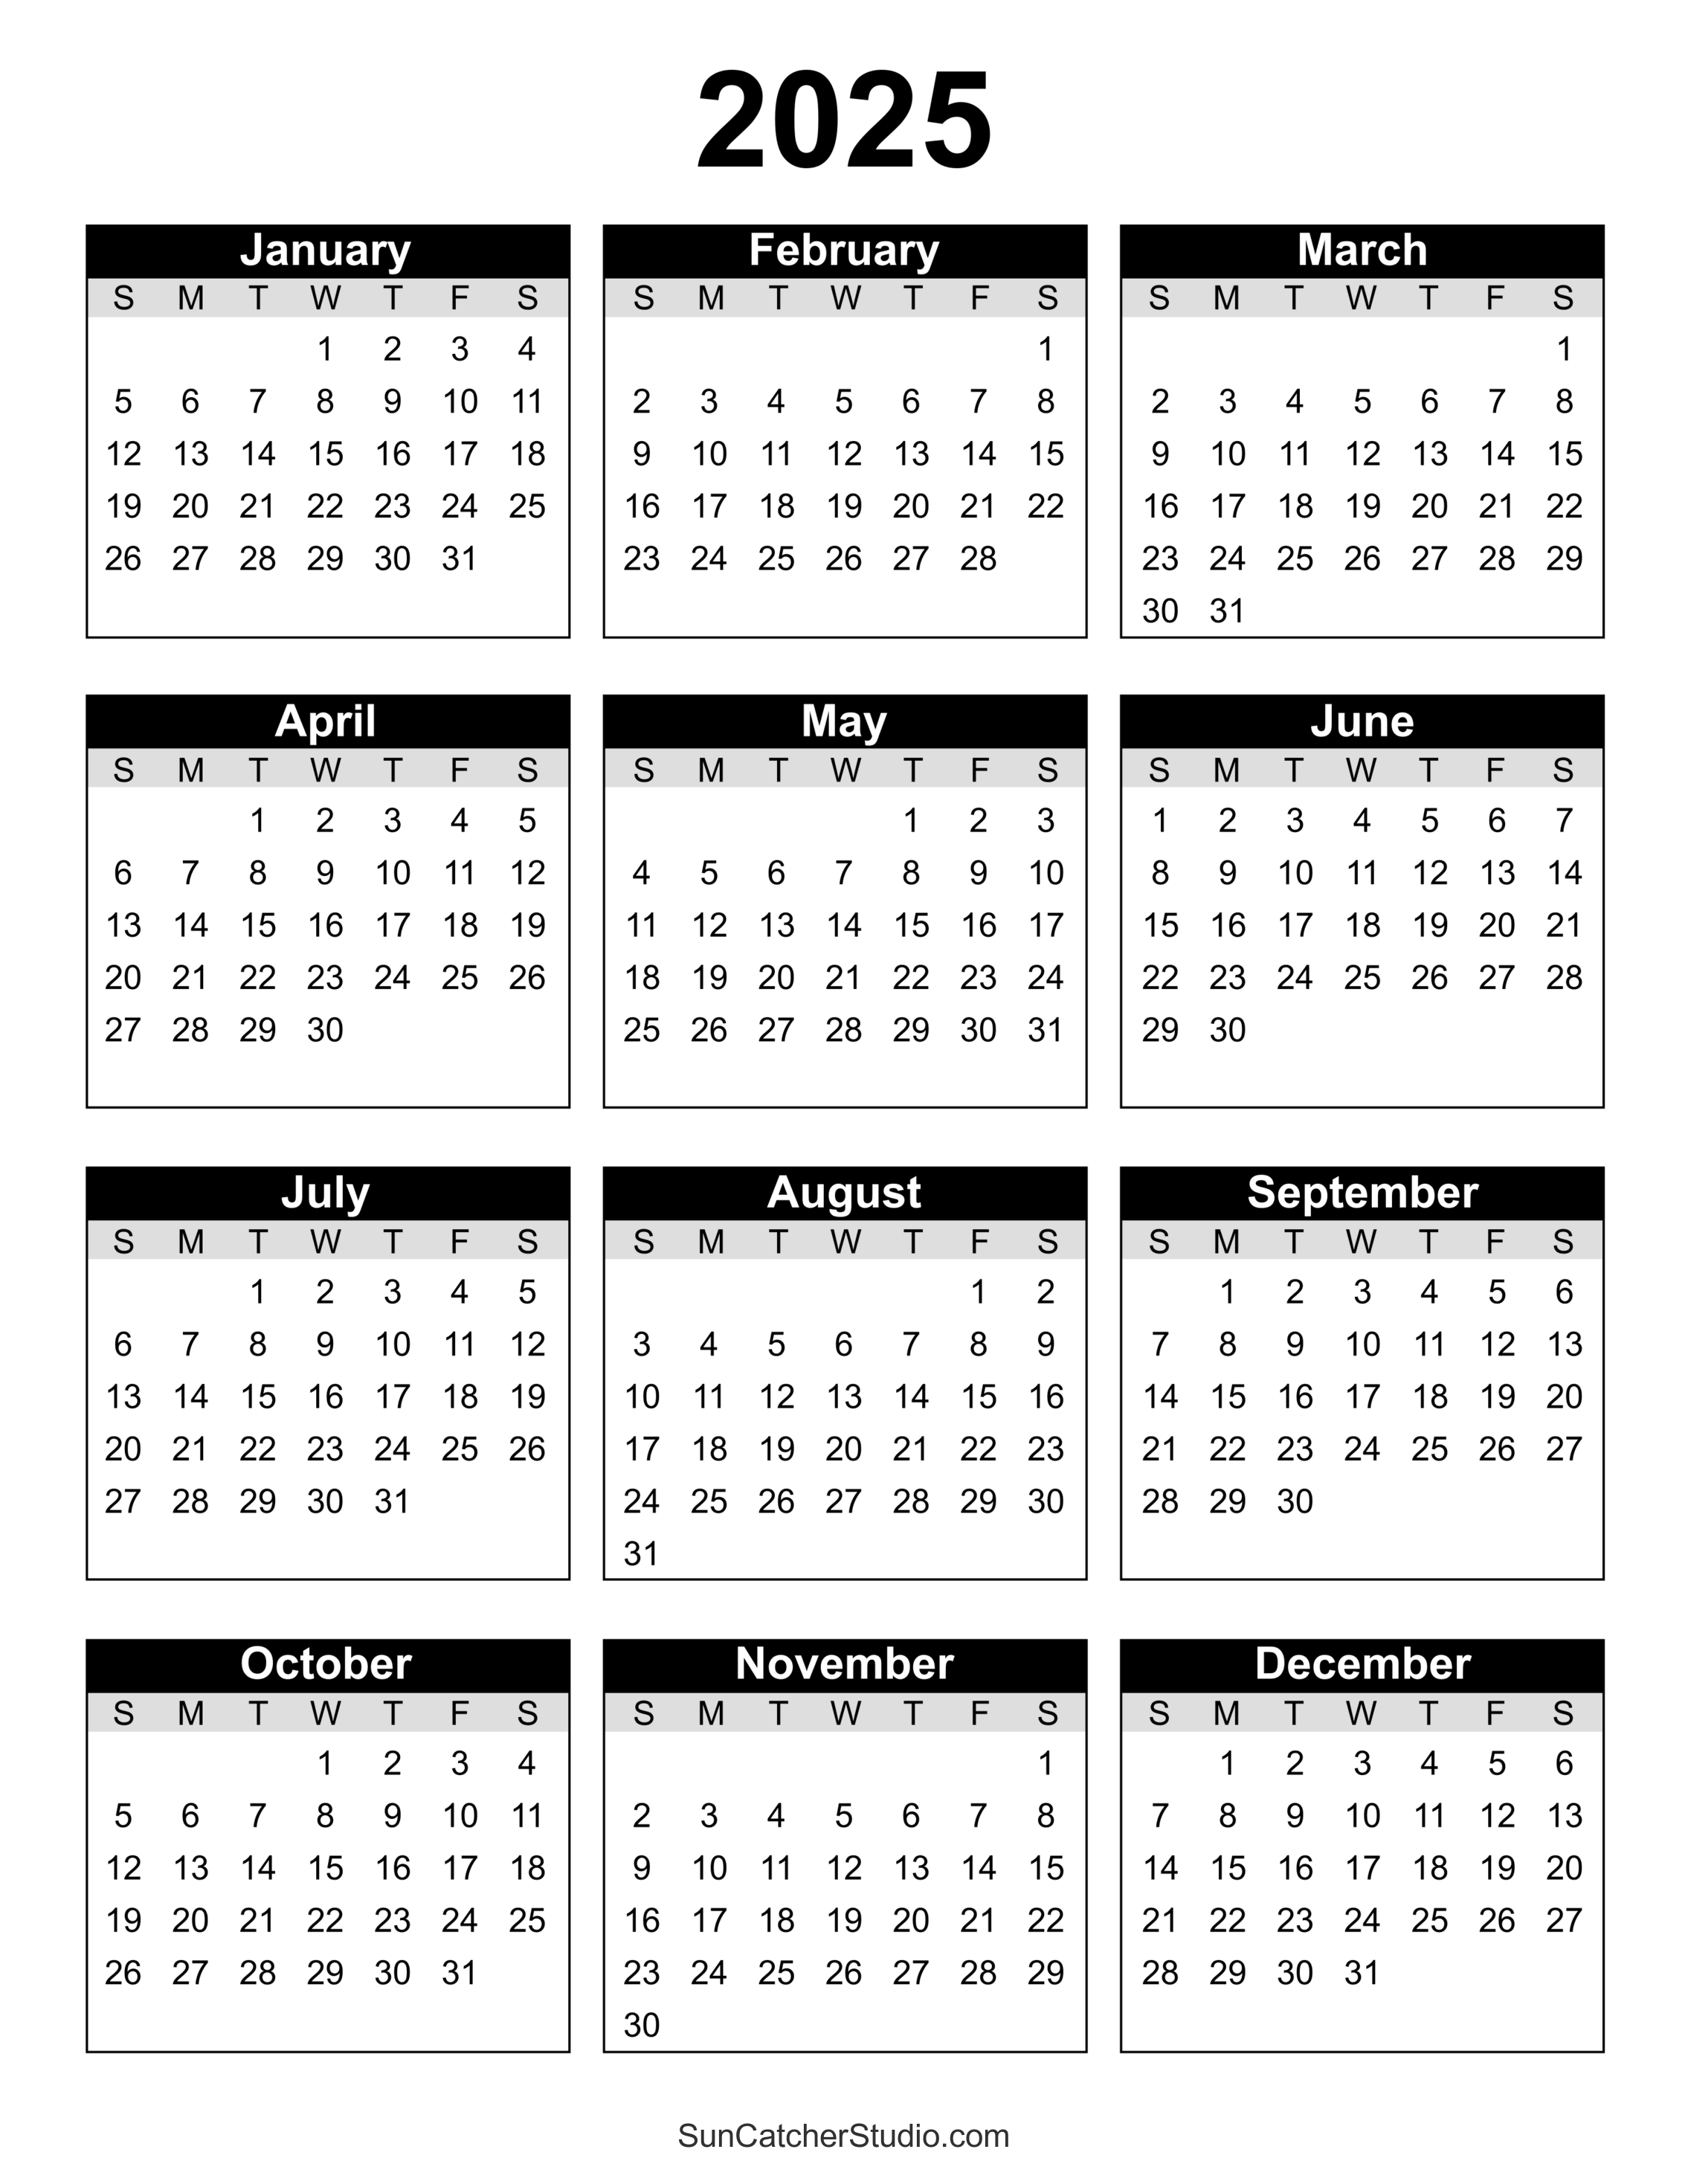 free-printable-2025-yearly-calendar-diy-projects-patterns-monograms